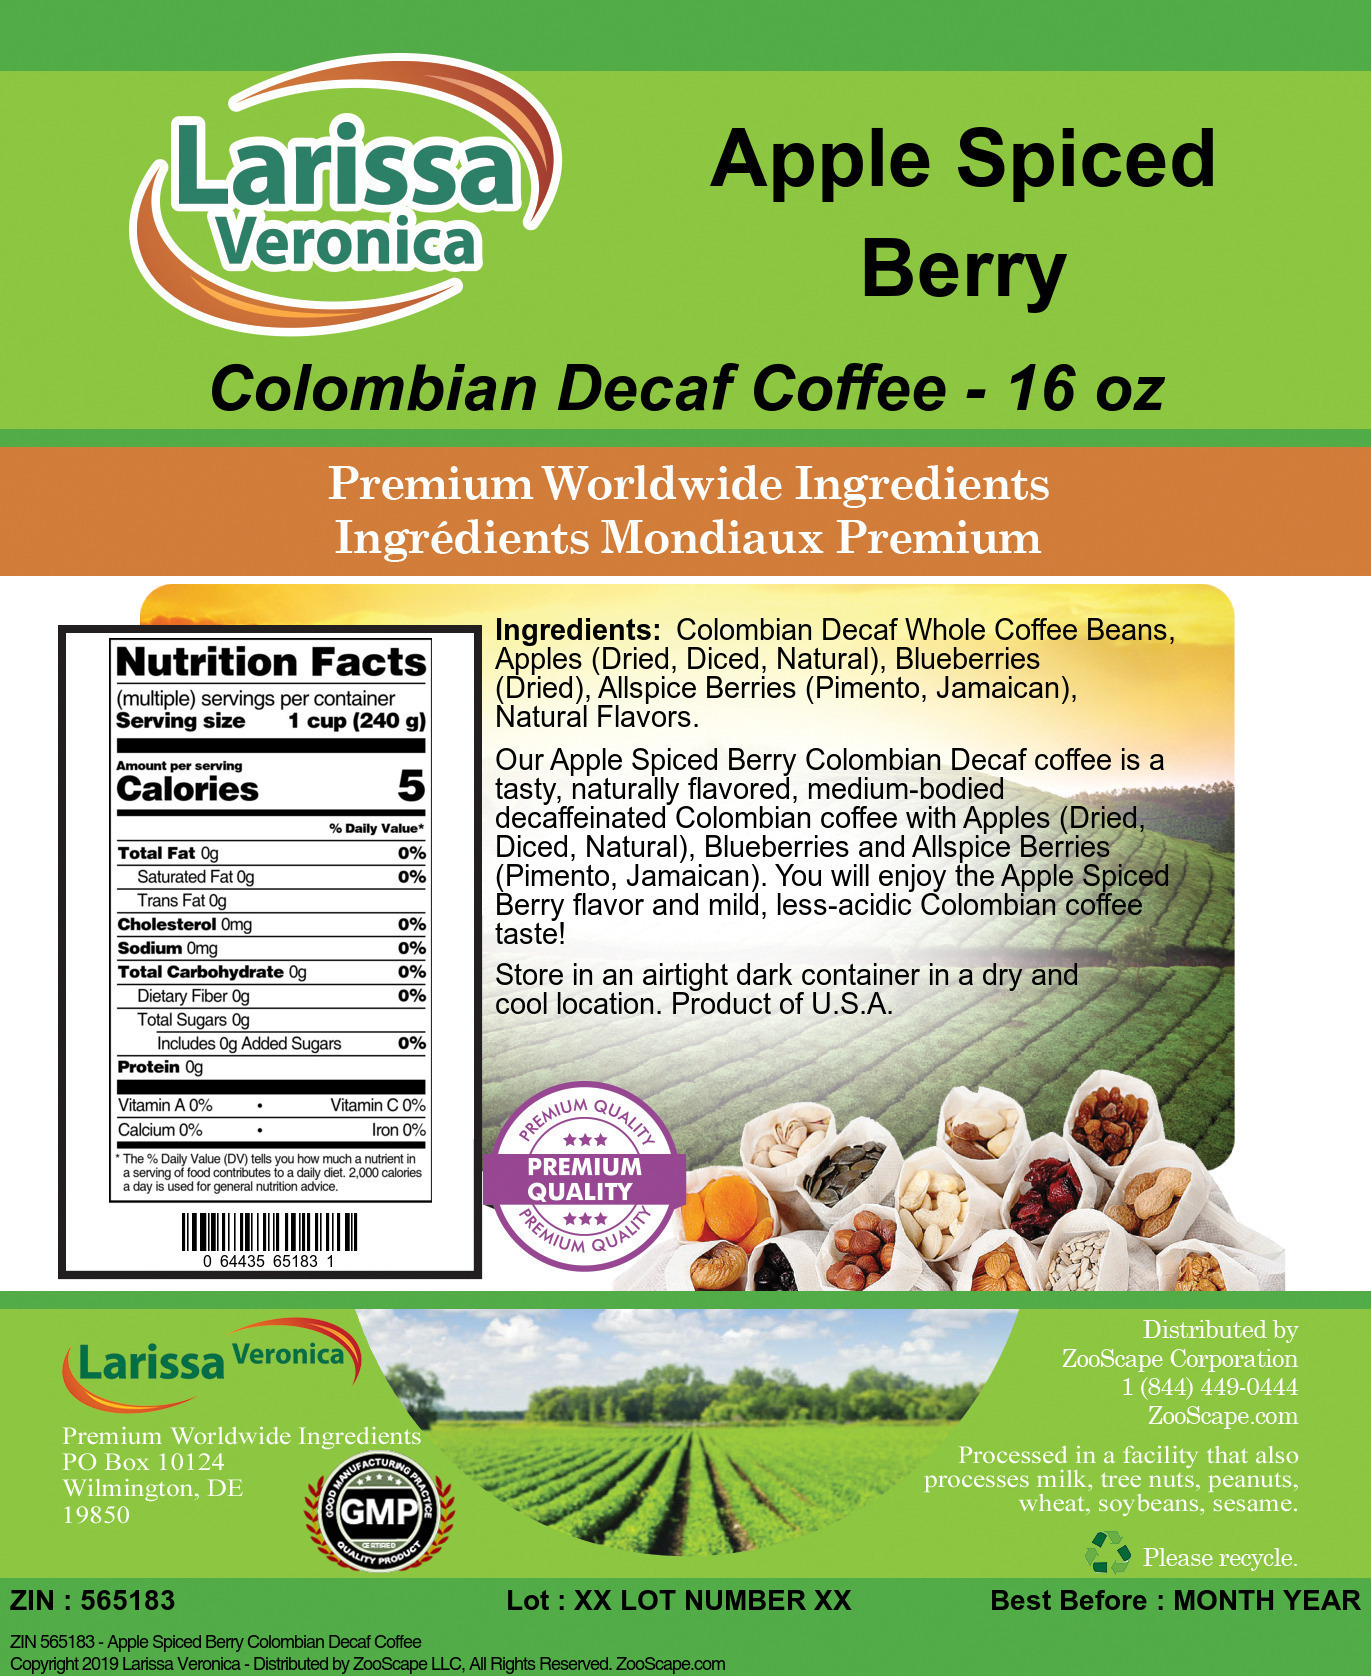 Apple Spiced Berry Colombian Decaf Coffee - Label